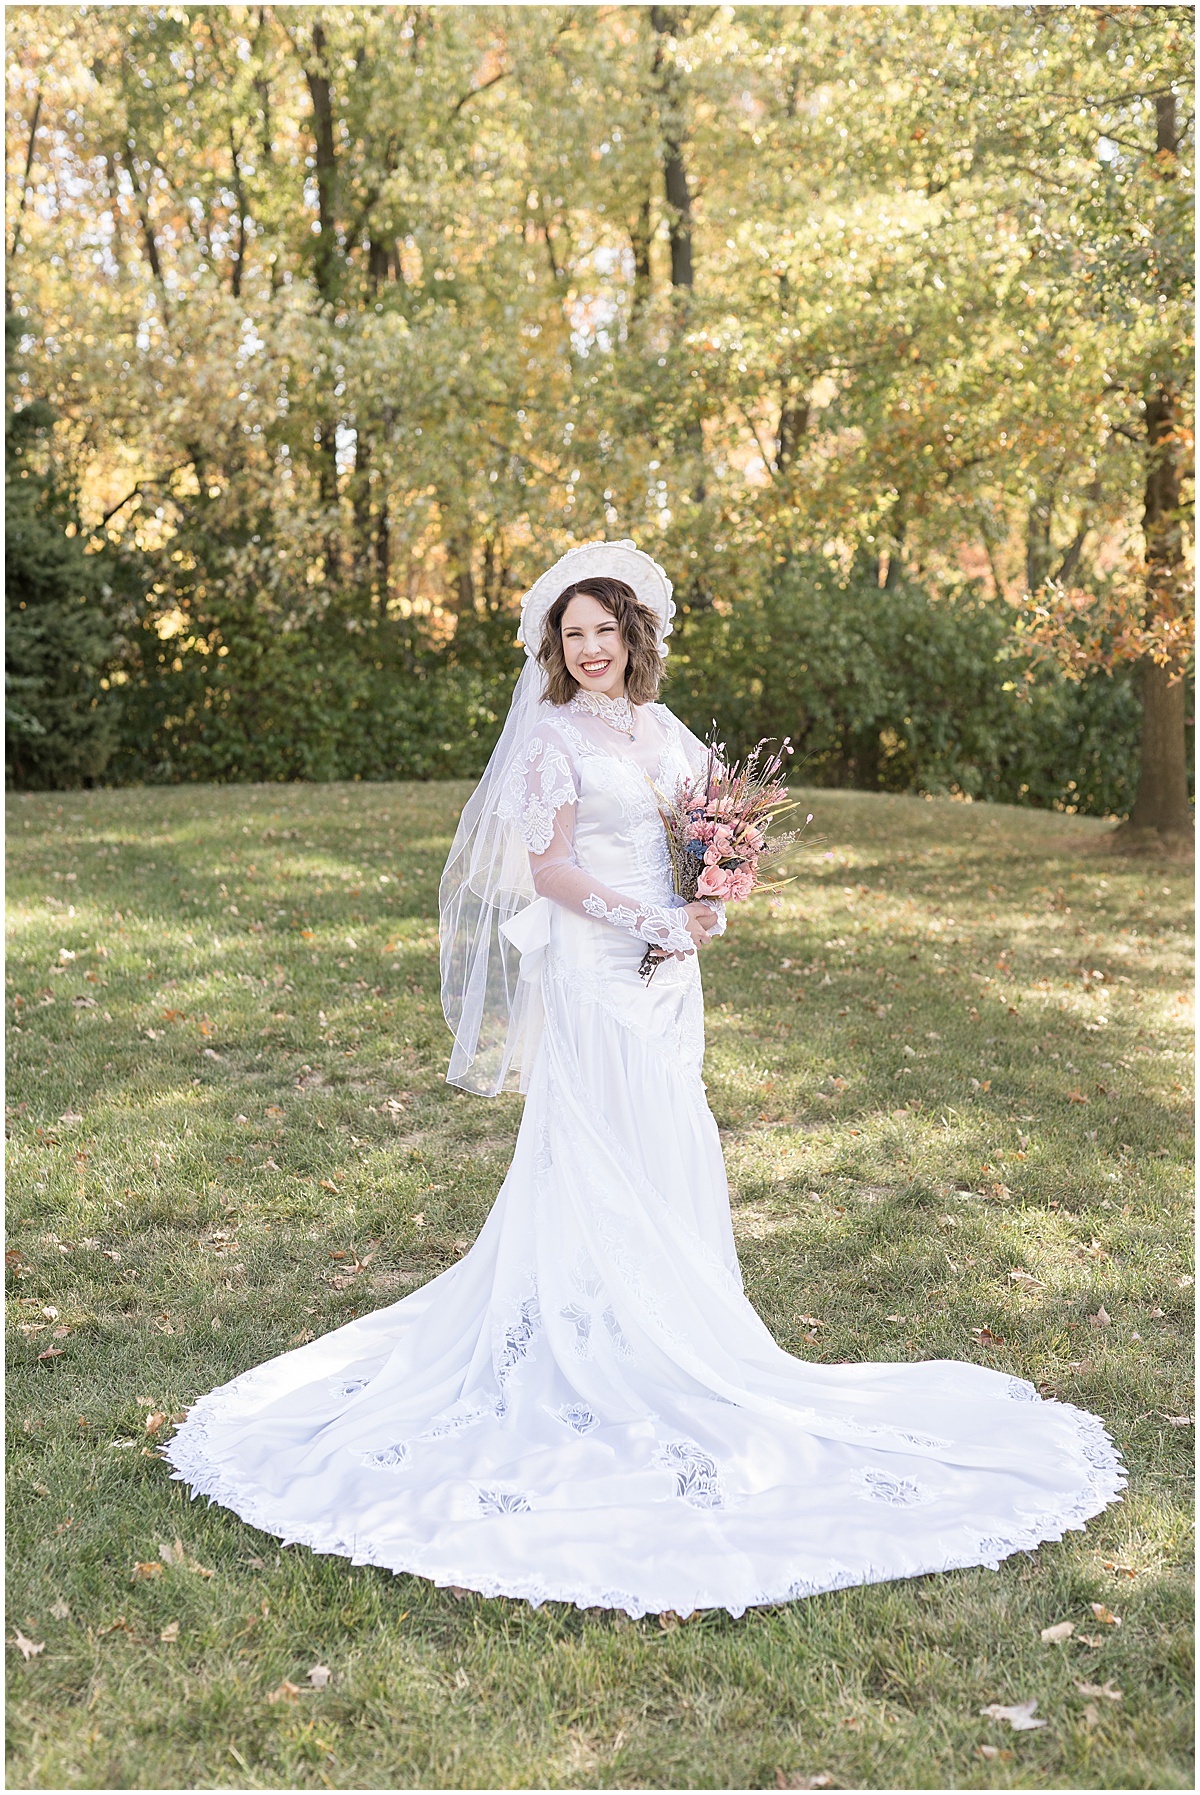 Bride shows off vintage dress for fall wedding at The Rat Pak Venue in downtown Lafayette, Indiana photographed by Victoria Rayburn Photography